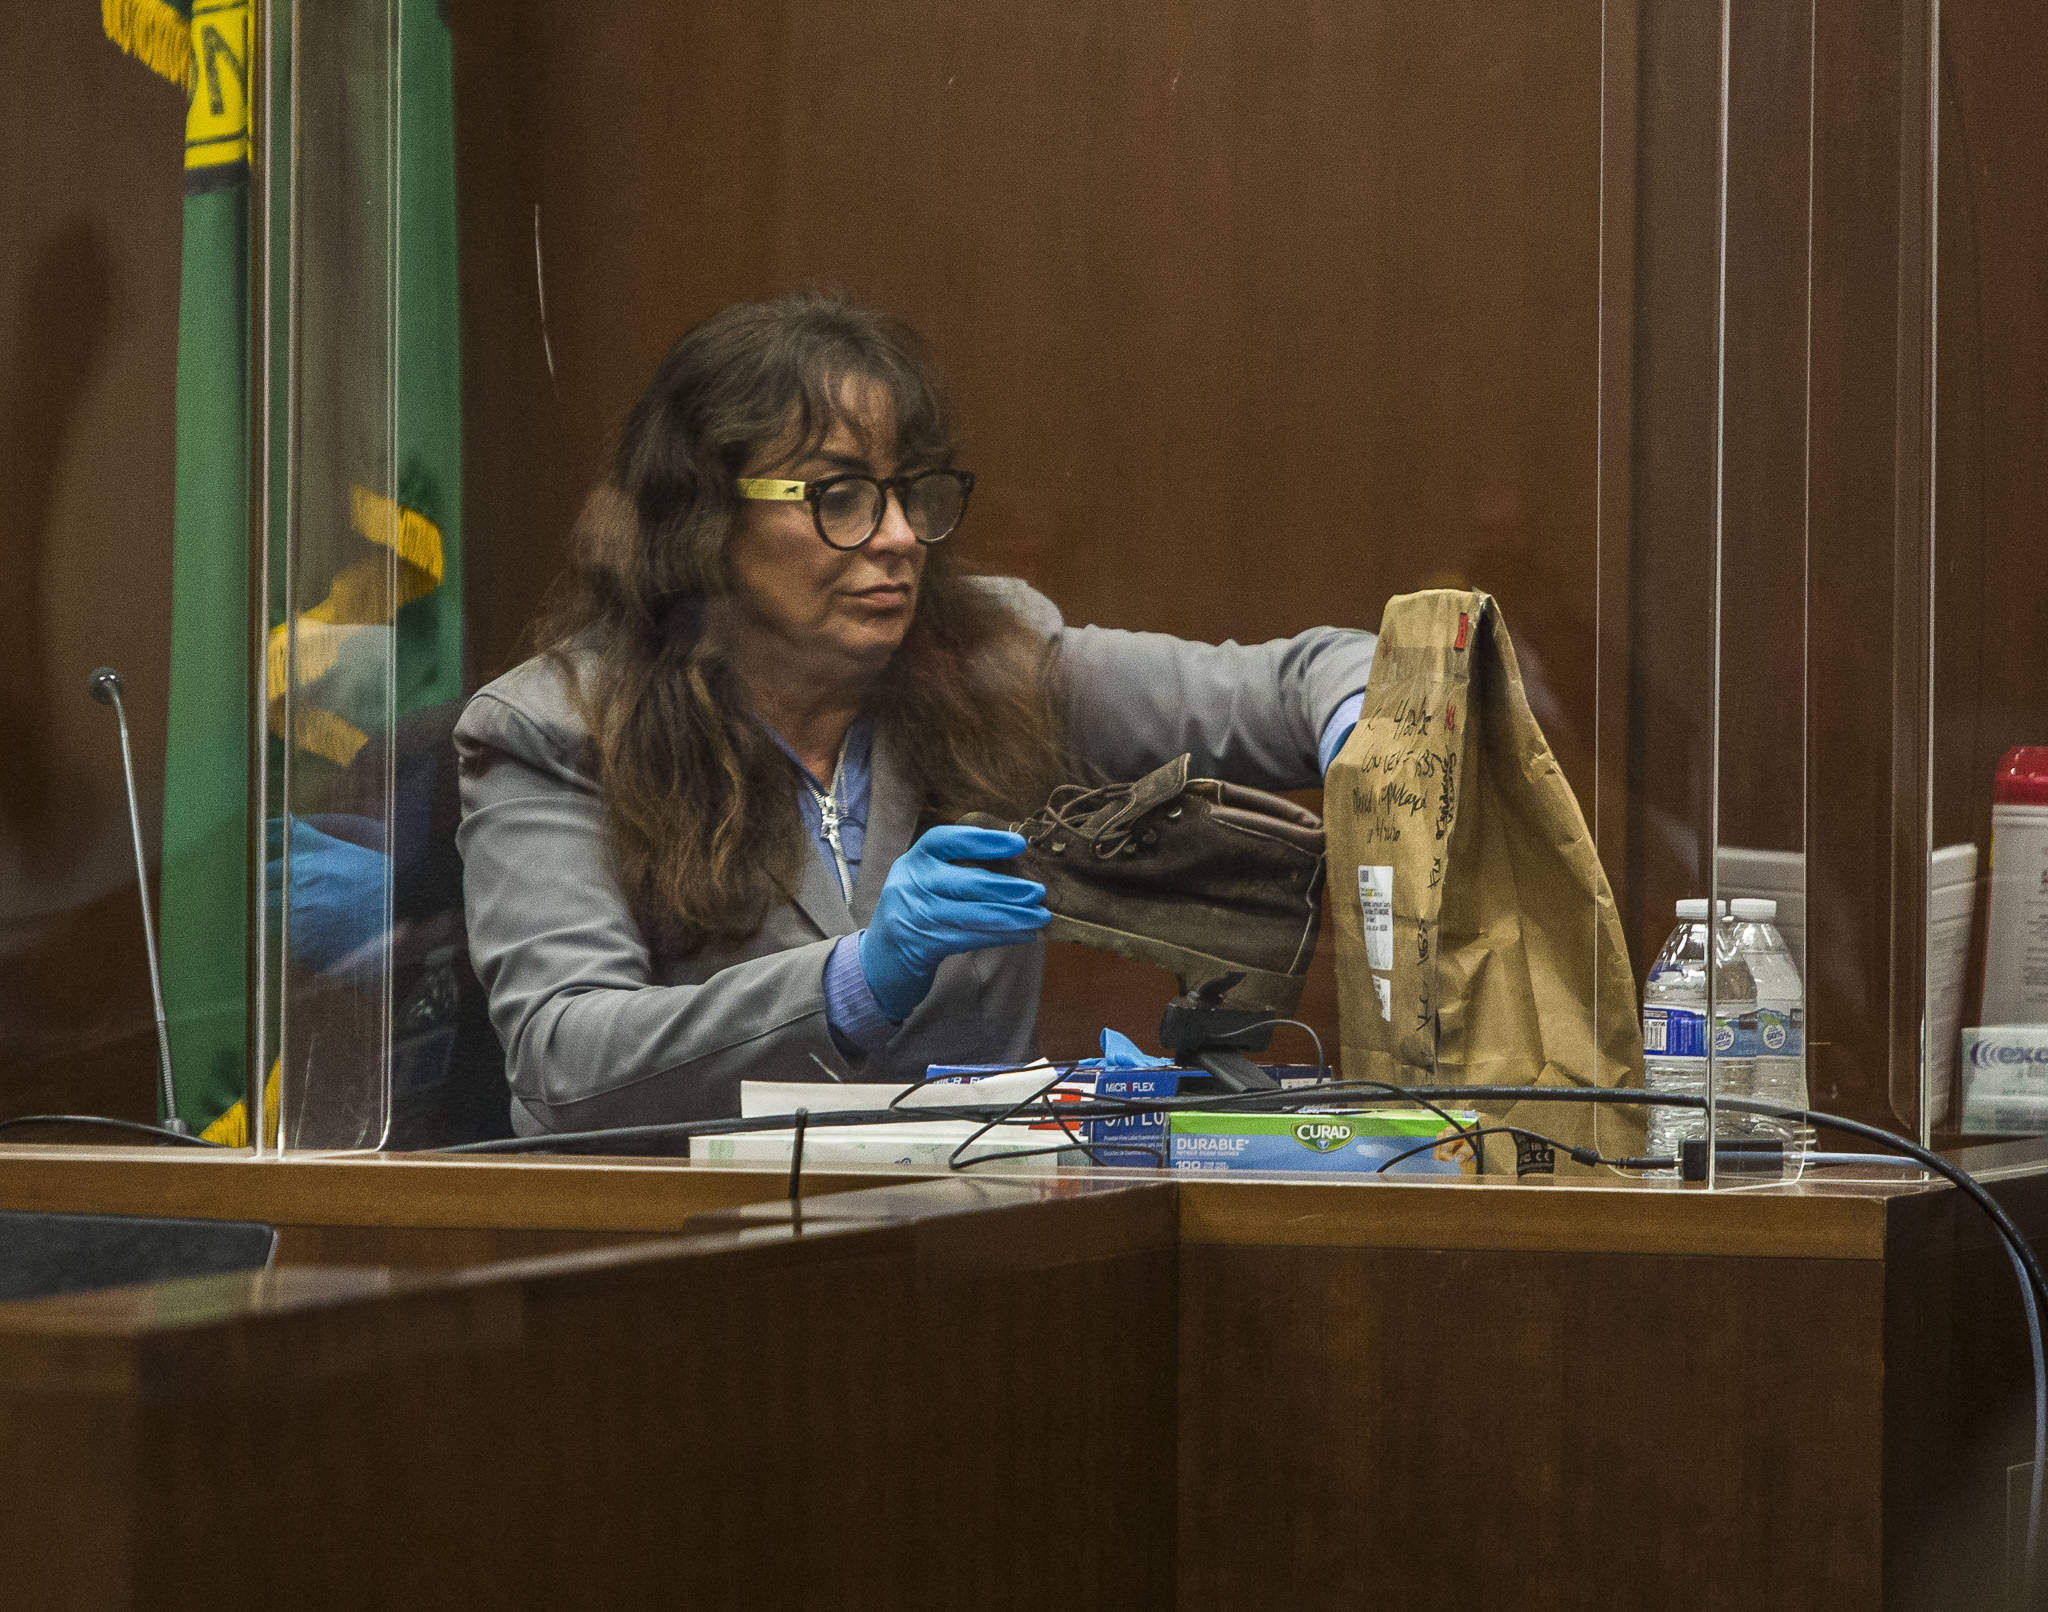 Jana Smith places the boot worn by her sister, Jody Loomis, back into an evidence bag while testifying Wednesday in Everett. (Olivia Vanni / The Herald)